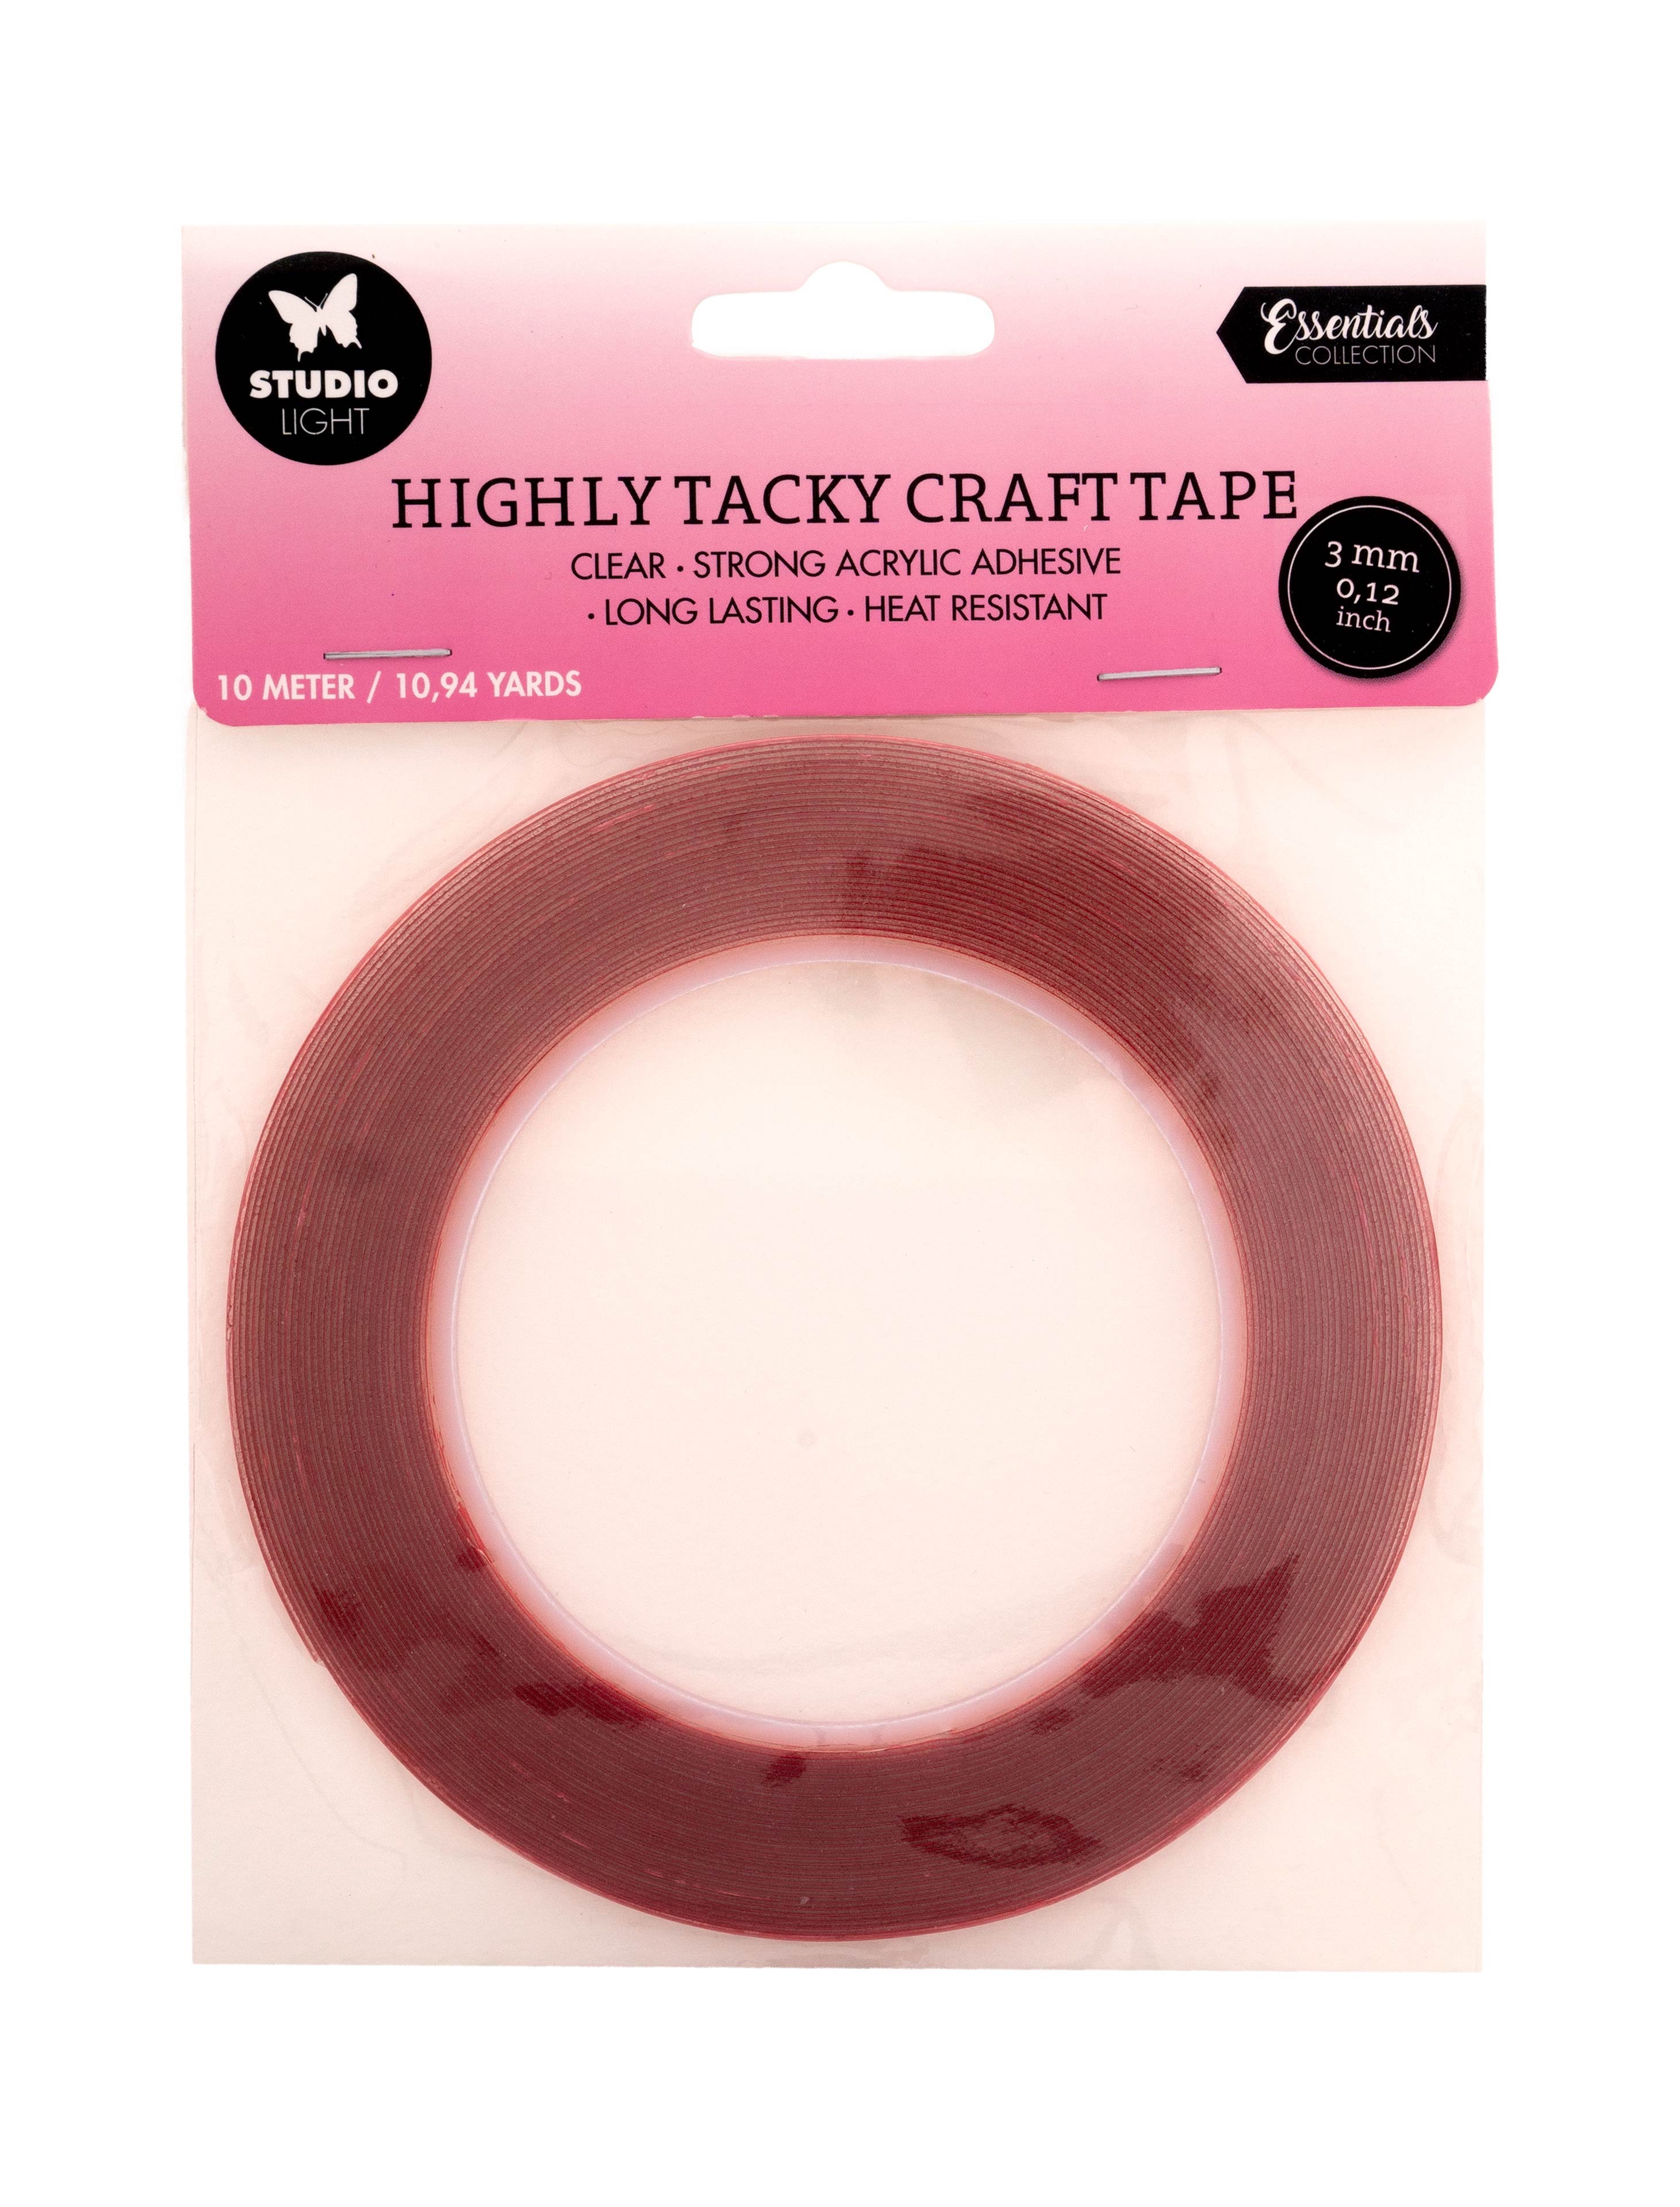 SL Highly Tacky Craft Tape Doublesided Adhesive 3mm Essential Tools 165x130x3mm 10 M nr.01